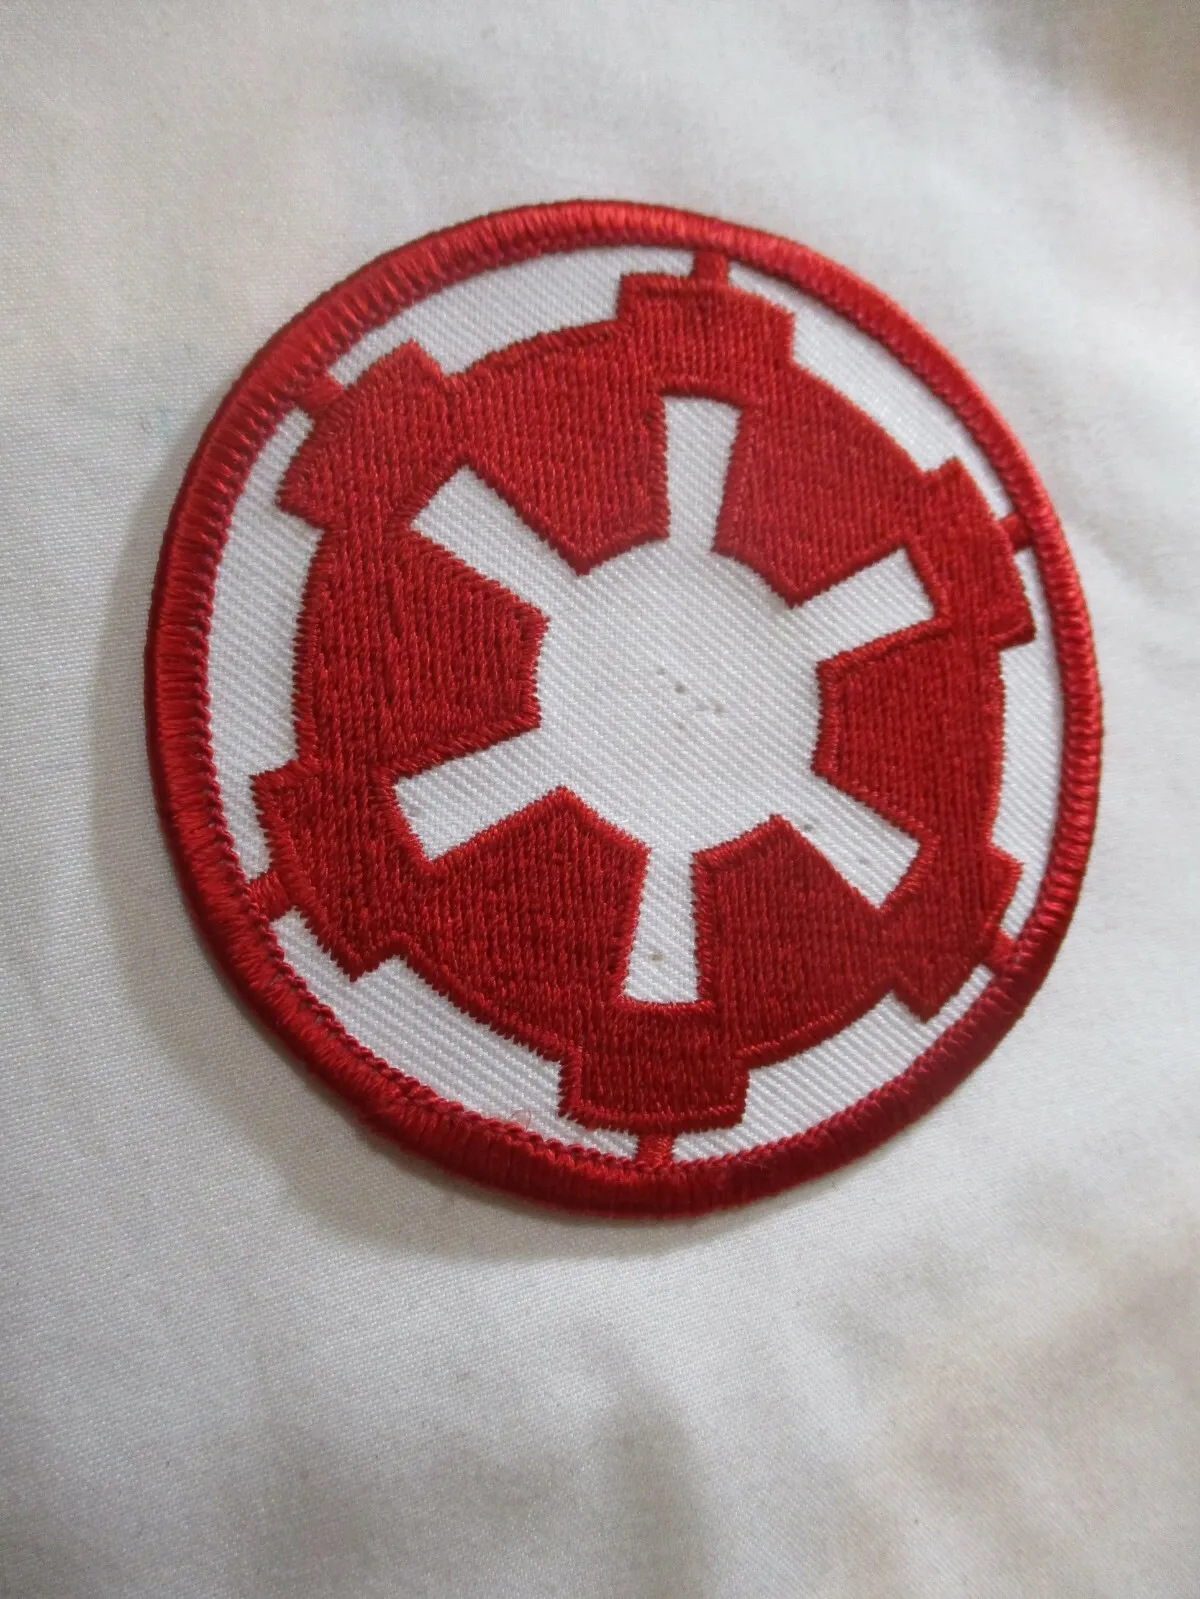 Star Wars Red And White Imperial Patch